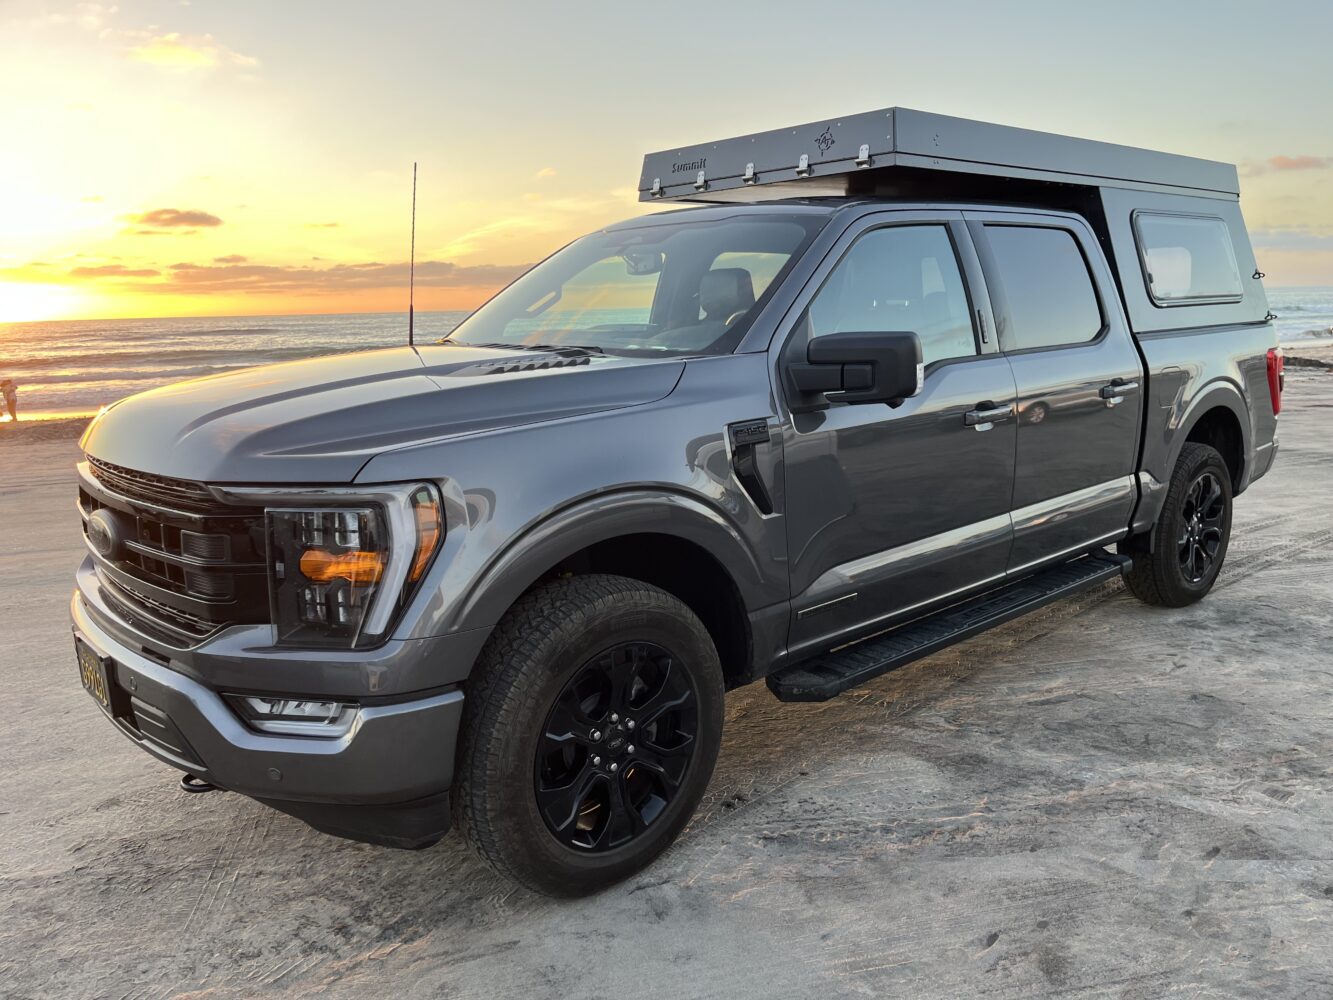 FORD F150 CAMPER in the Desert @4xoverland 